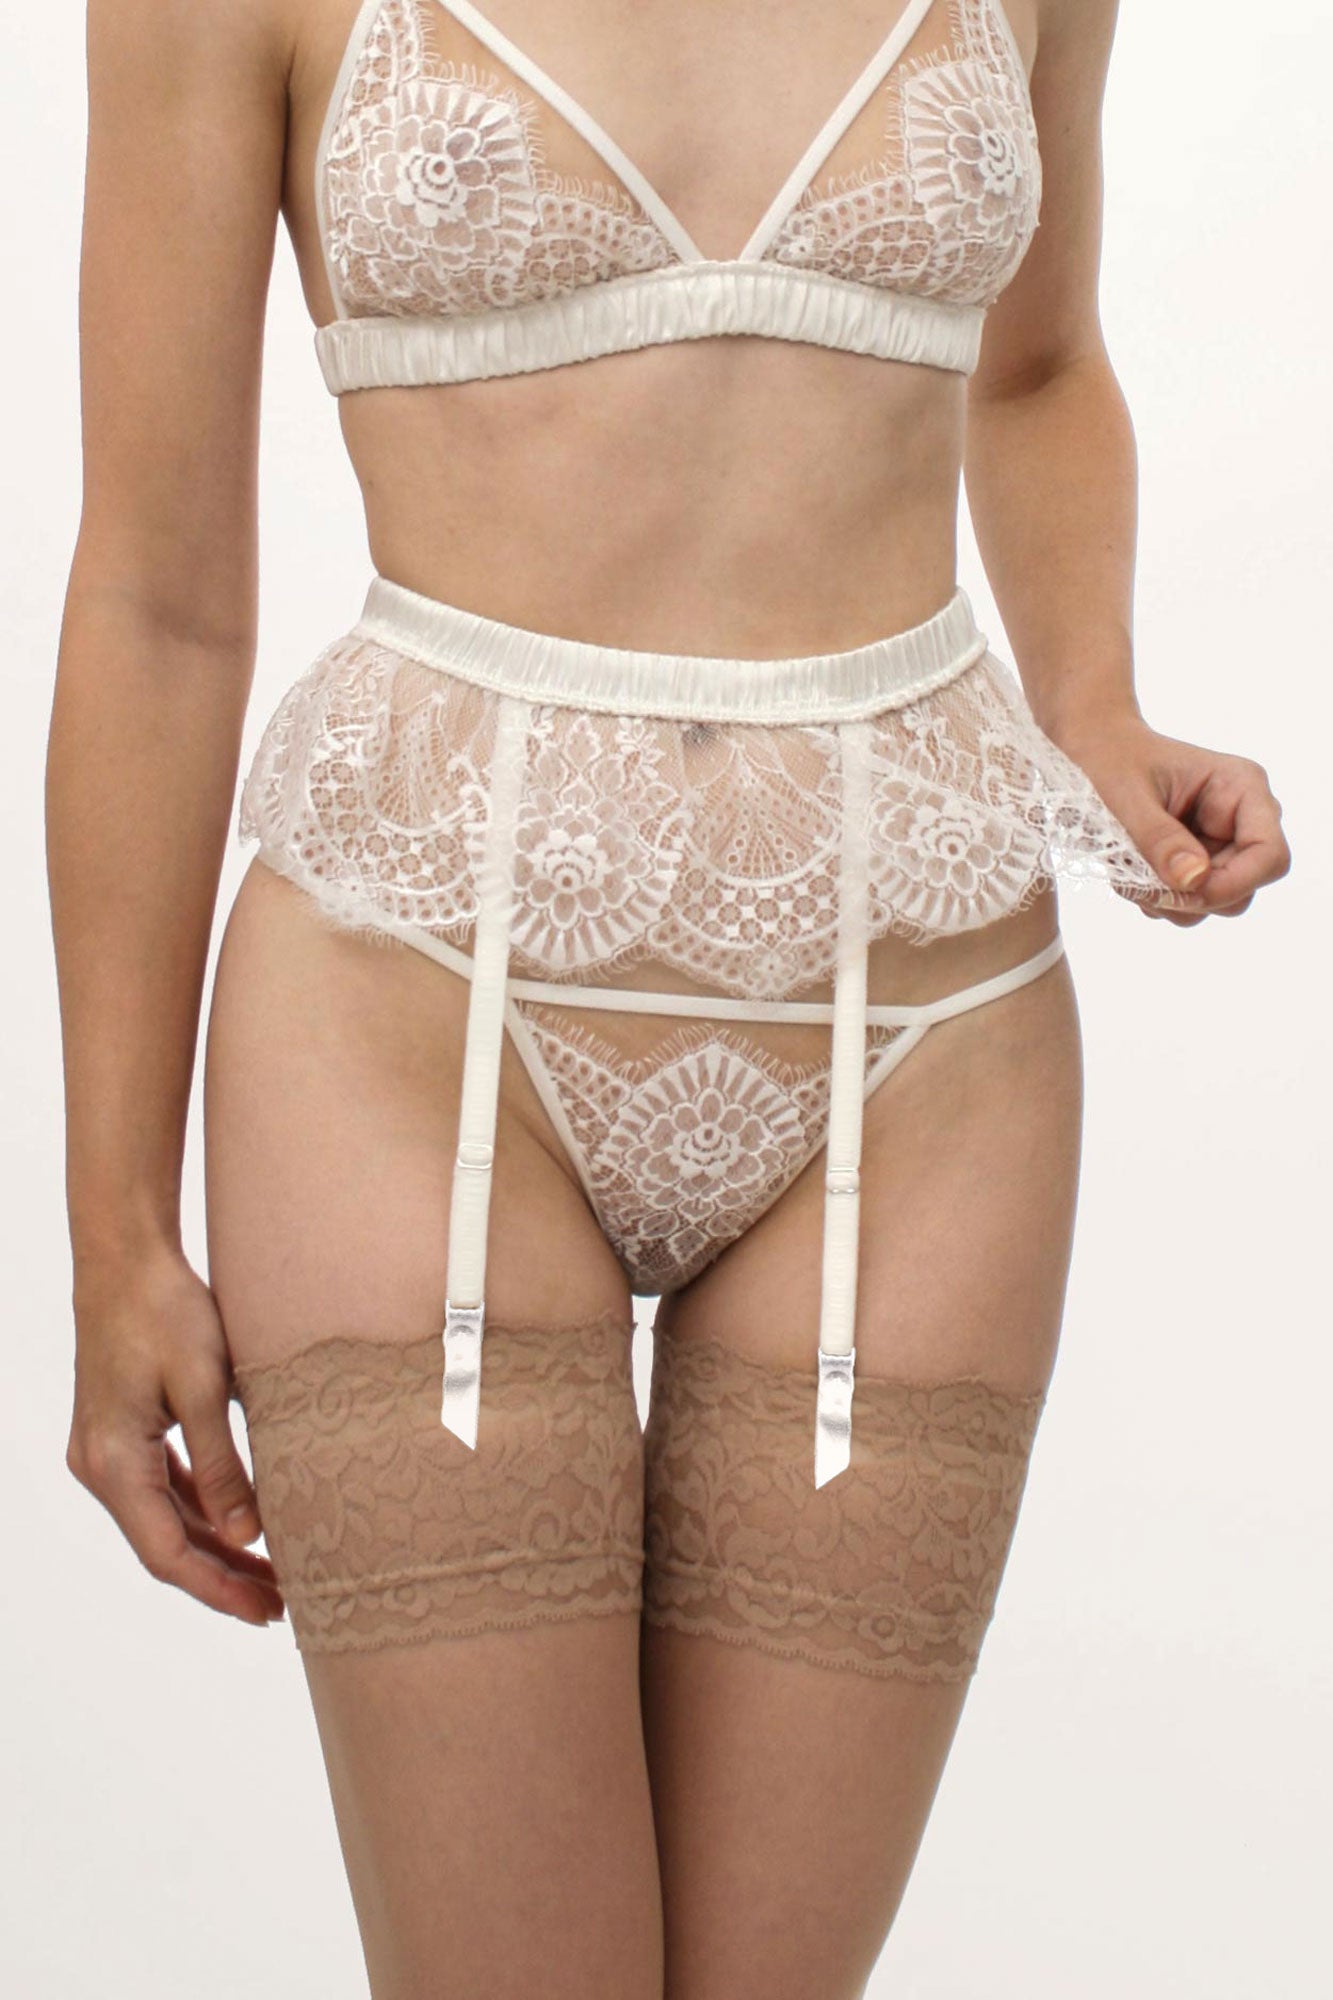 White lace bralettes  Luxury, vintage-inspired lingerie